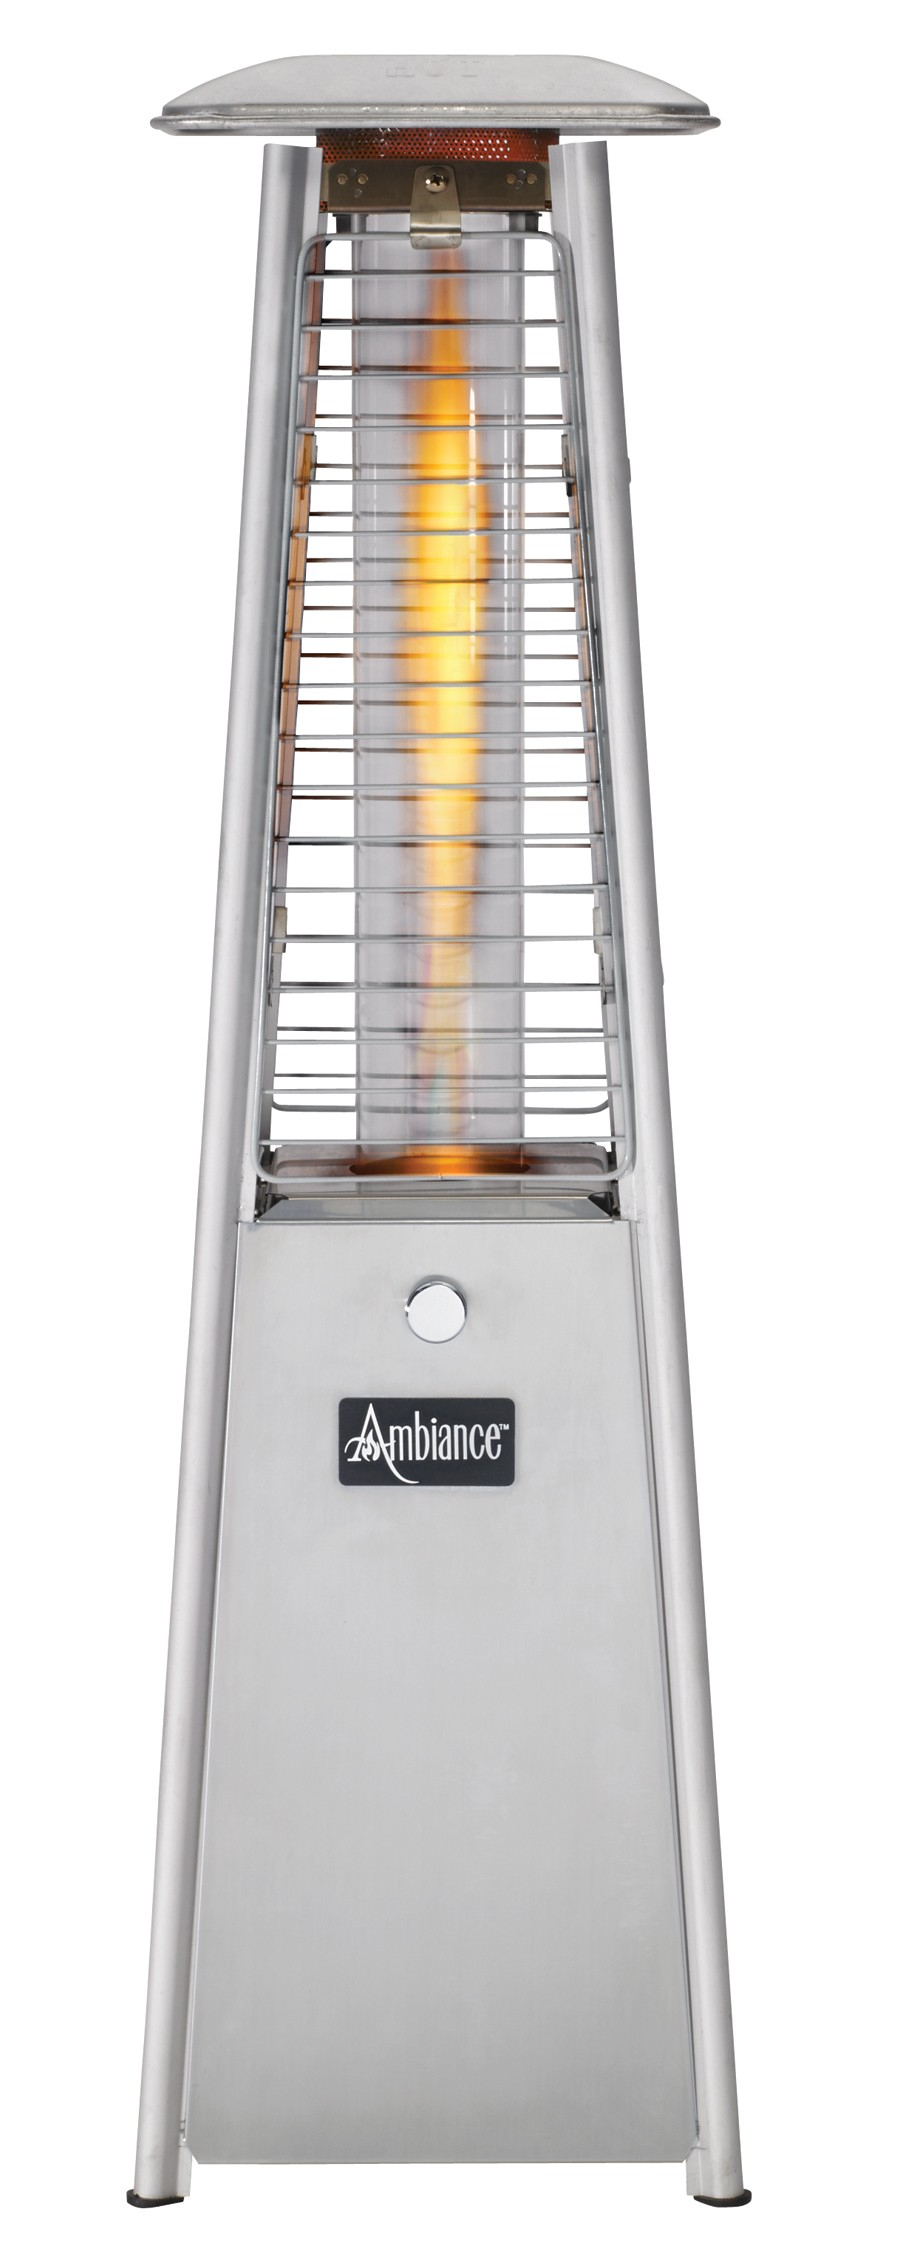 Patio Comfort Ambiance Mini Heater Propane Gift Guide throughout proportions 900 X 2268